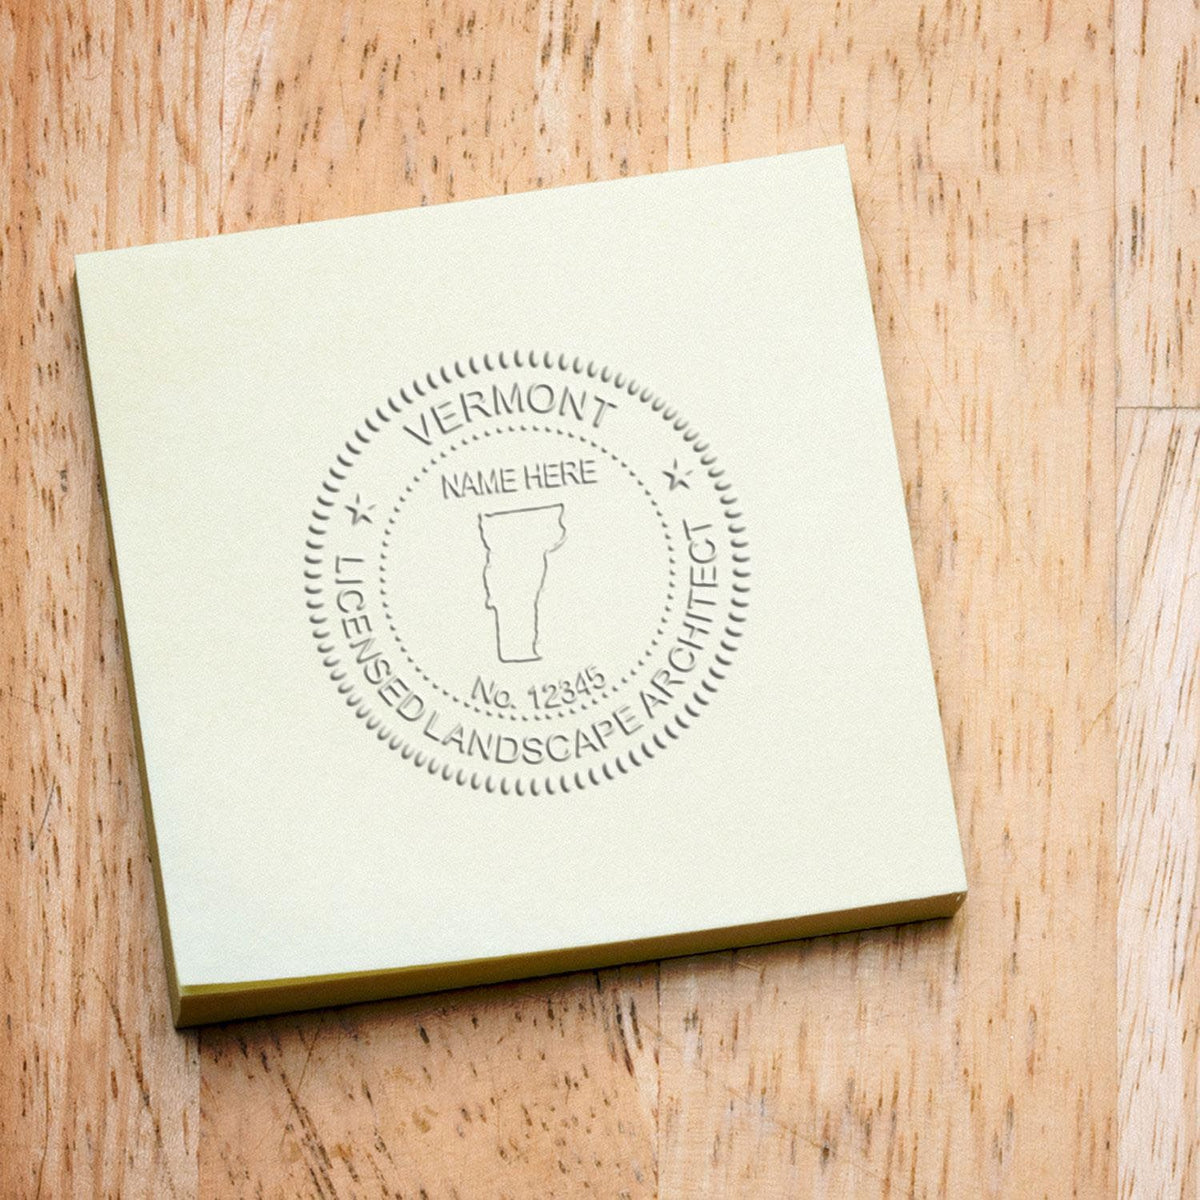 An in use photo of the Gift Vermont Landscape Architect Seal showing a sample imprint on a cardstock